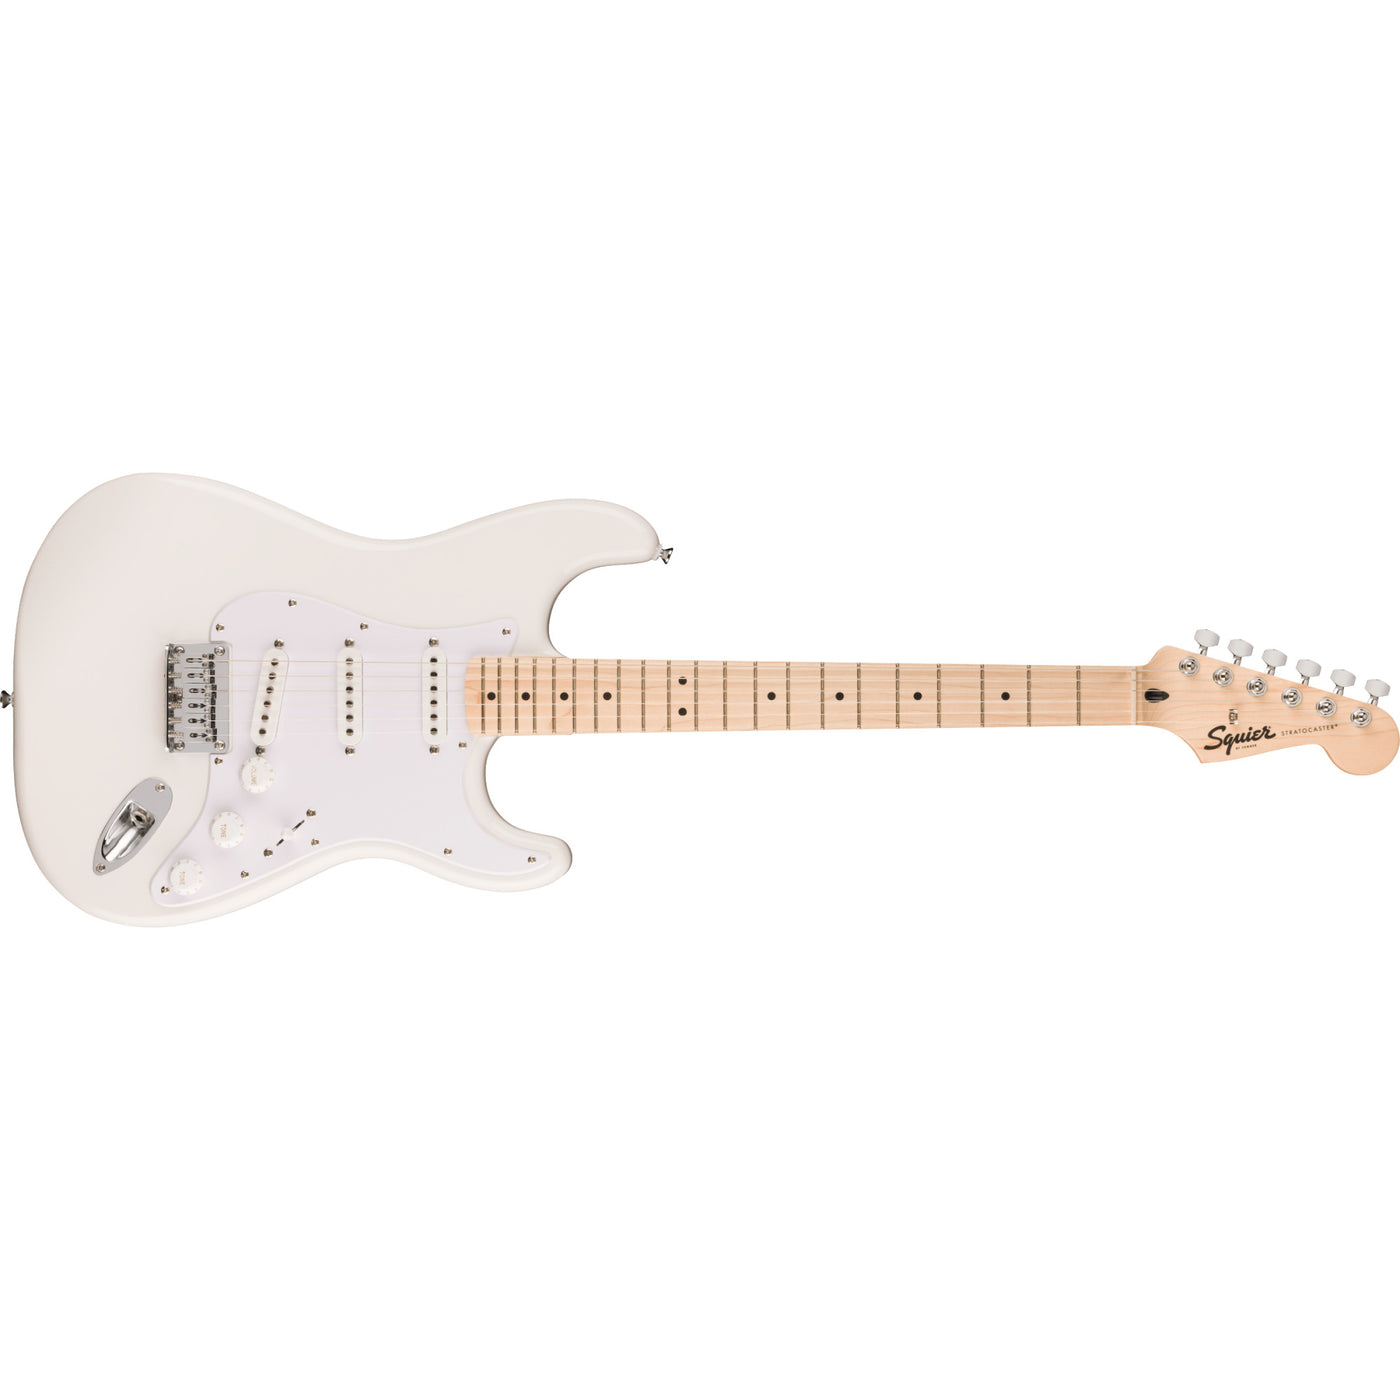 Squier Sonic Stratocaster HT Electric Guitar, Arctic White (0373252580)